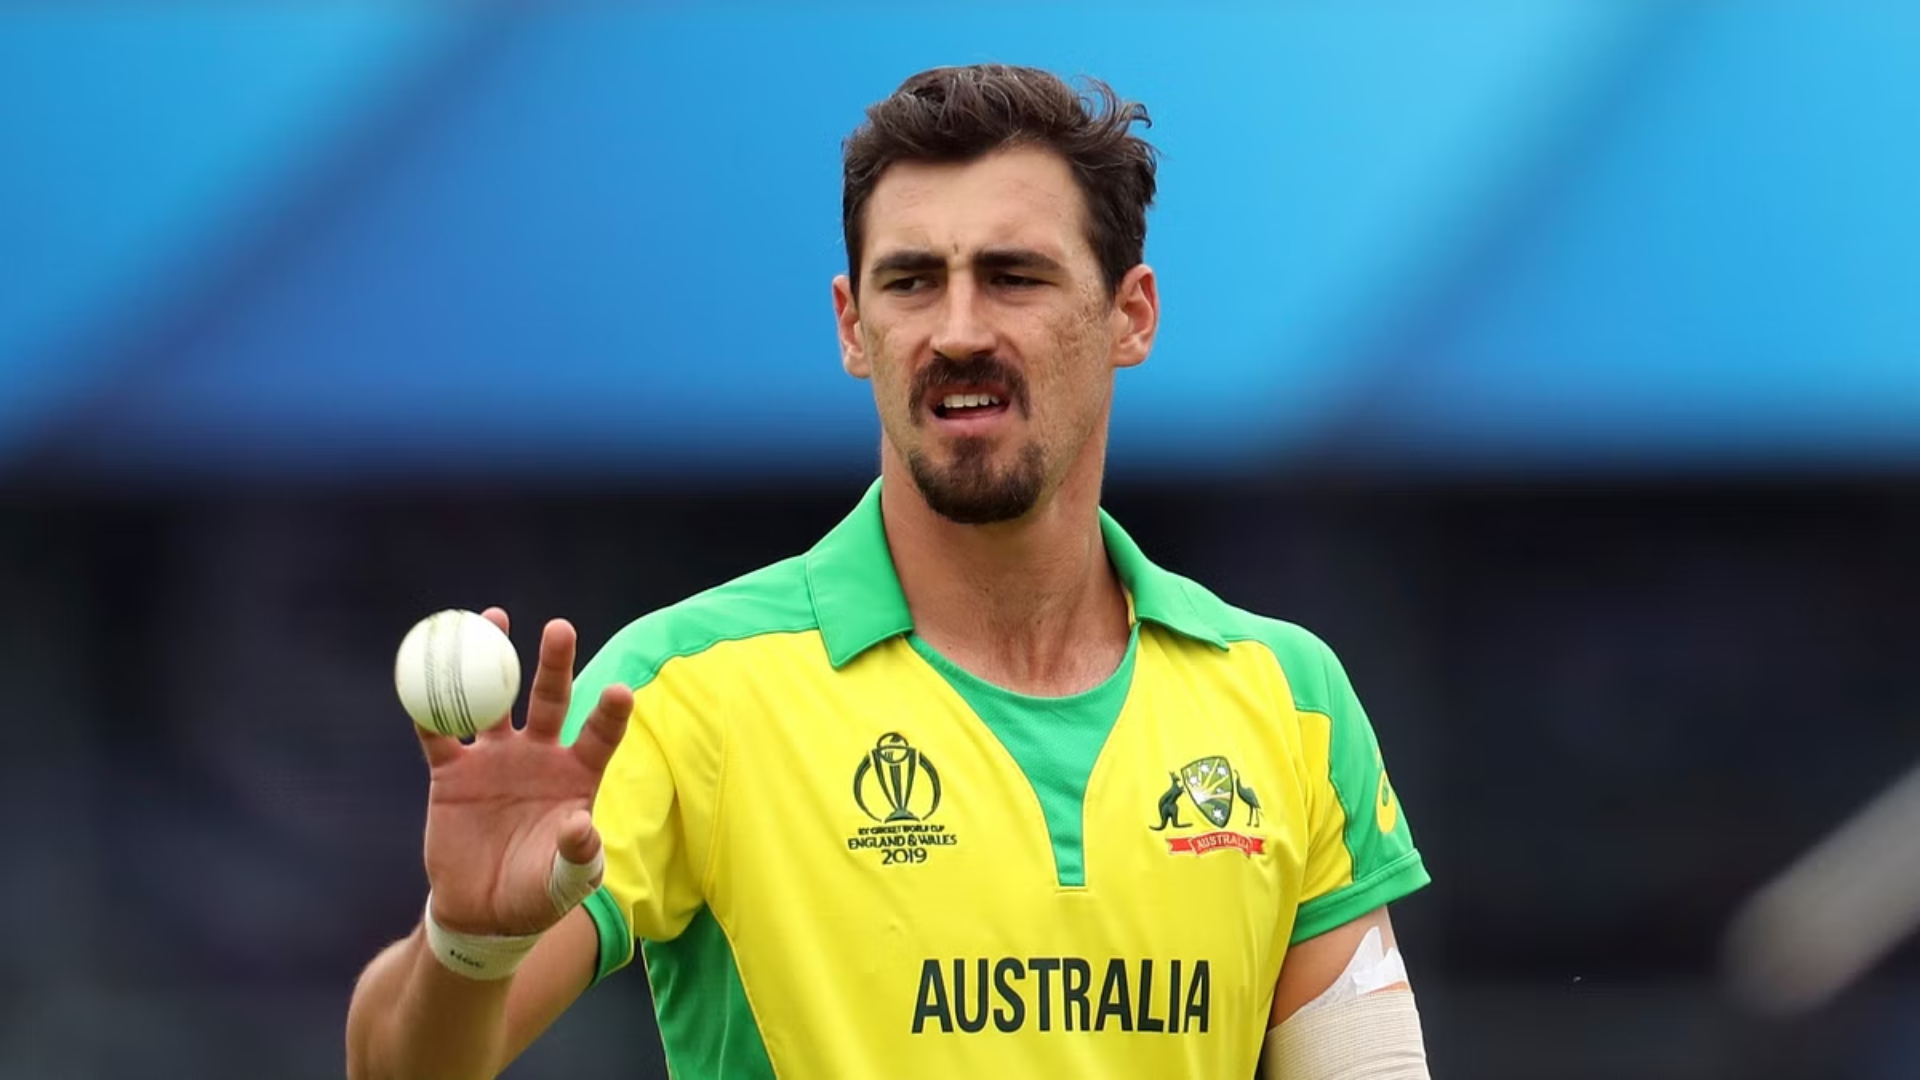 IPL Auction: Mitchell Starc, who joins KKR for Rs 24.75 crore, becomes the most expensive player in league history